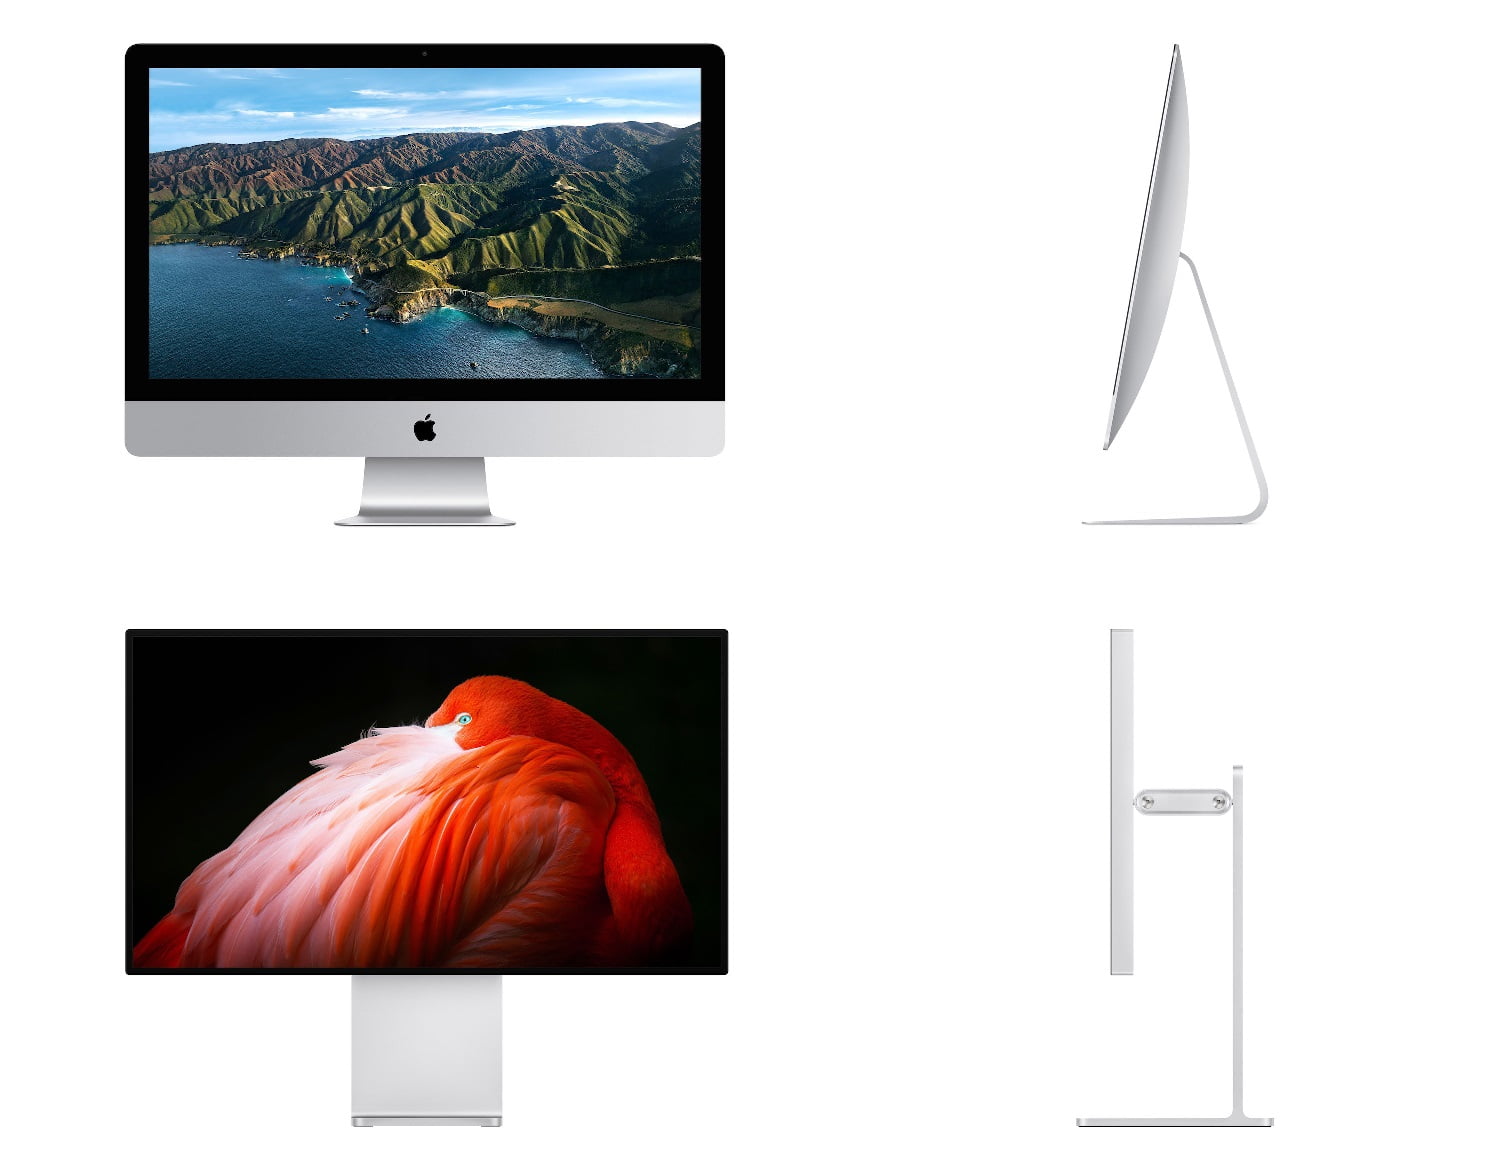 The design of the new Apple iMac is leaked